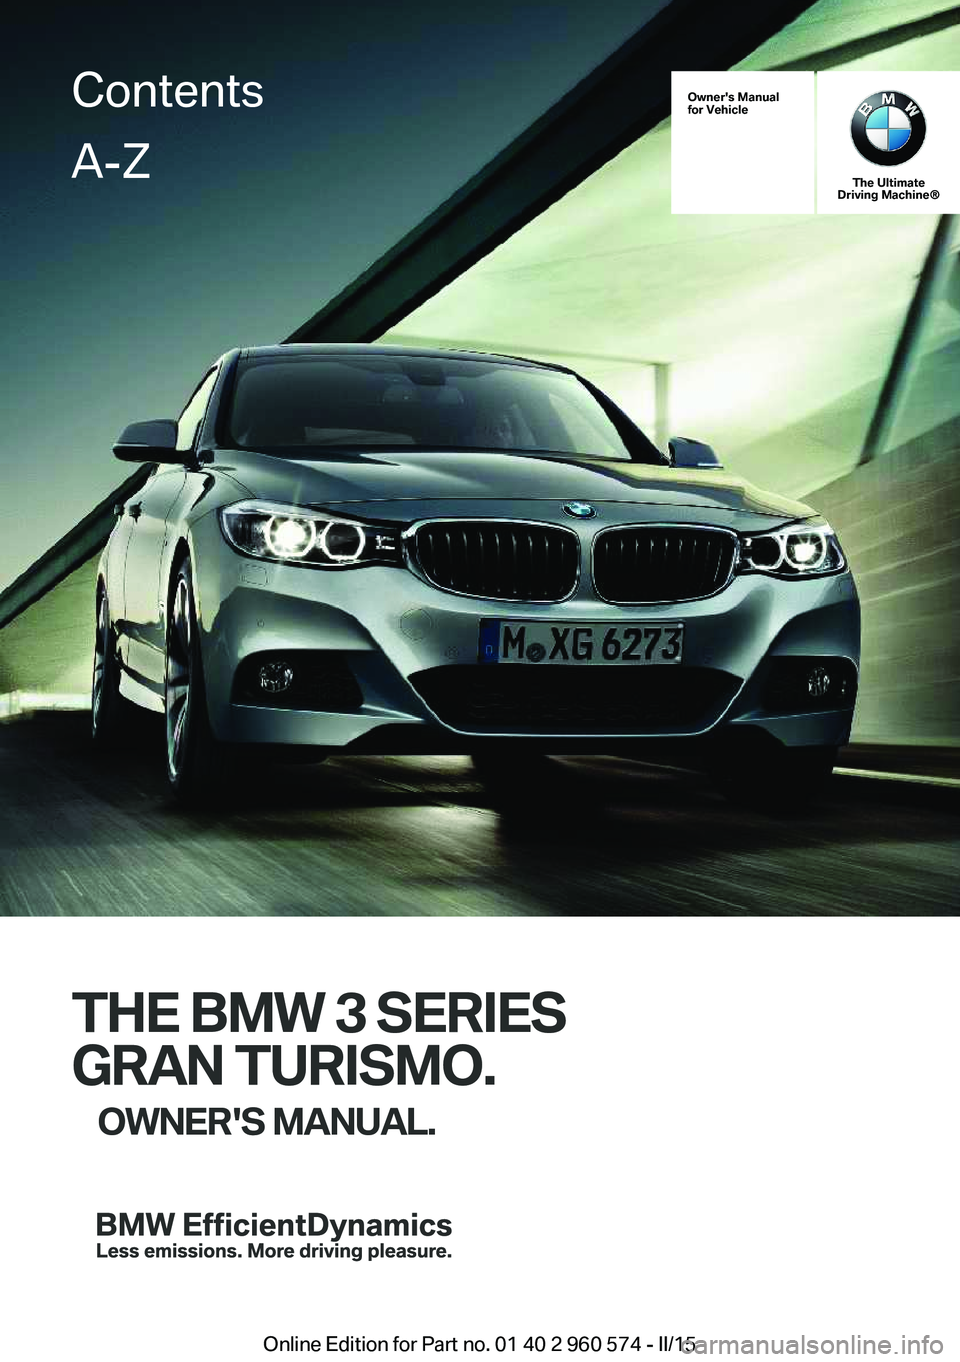 BMW 3 SERIES GRAN TURISMO 2015  Owners Manual Owner's Manual
for Vehicle
The Ultimate
Driving Machine®
THE BMW 3 SERIES
GRAN TURISMO. OWNER'S MANUAL.
ContentsA-Z
Online Edition for Part no. 01 40 2 960 574 - II/15   